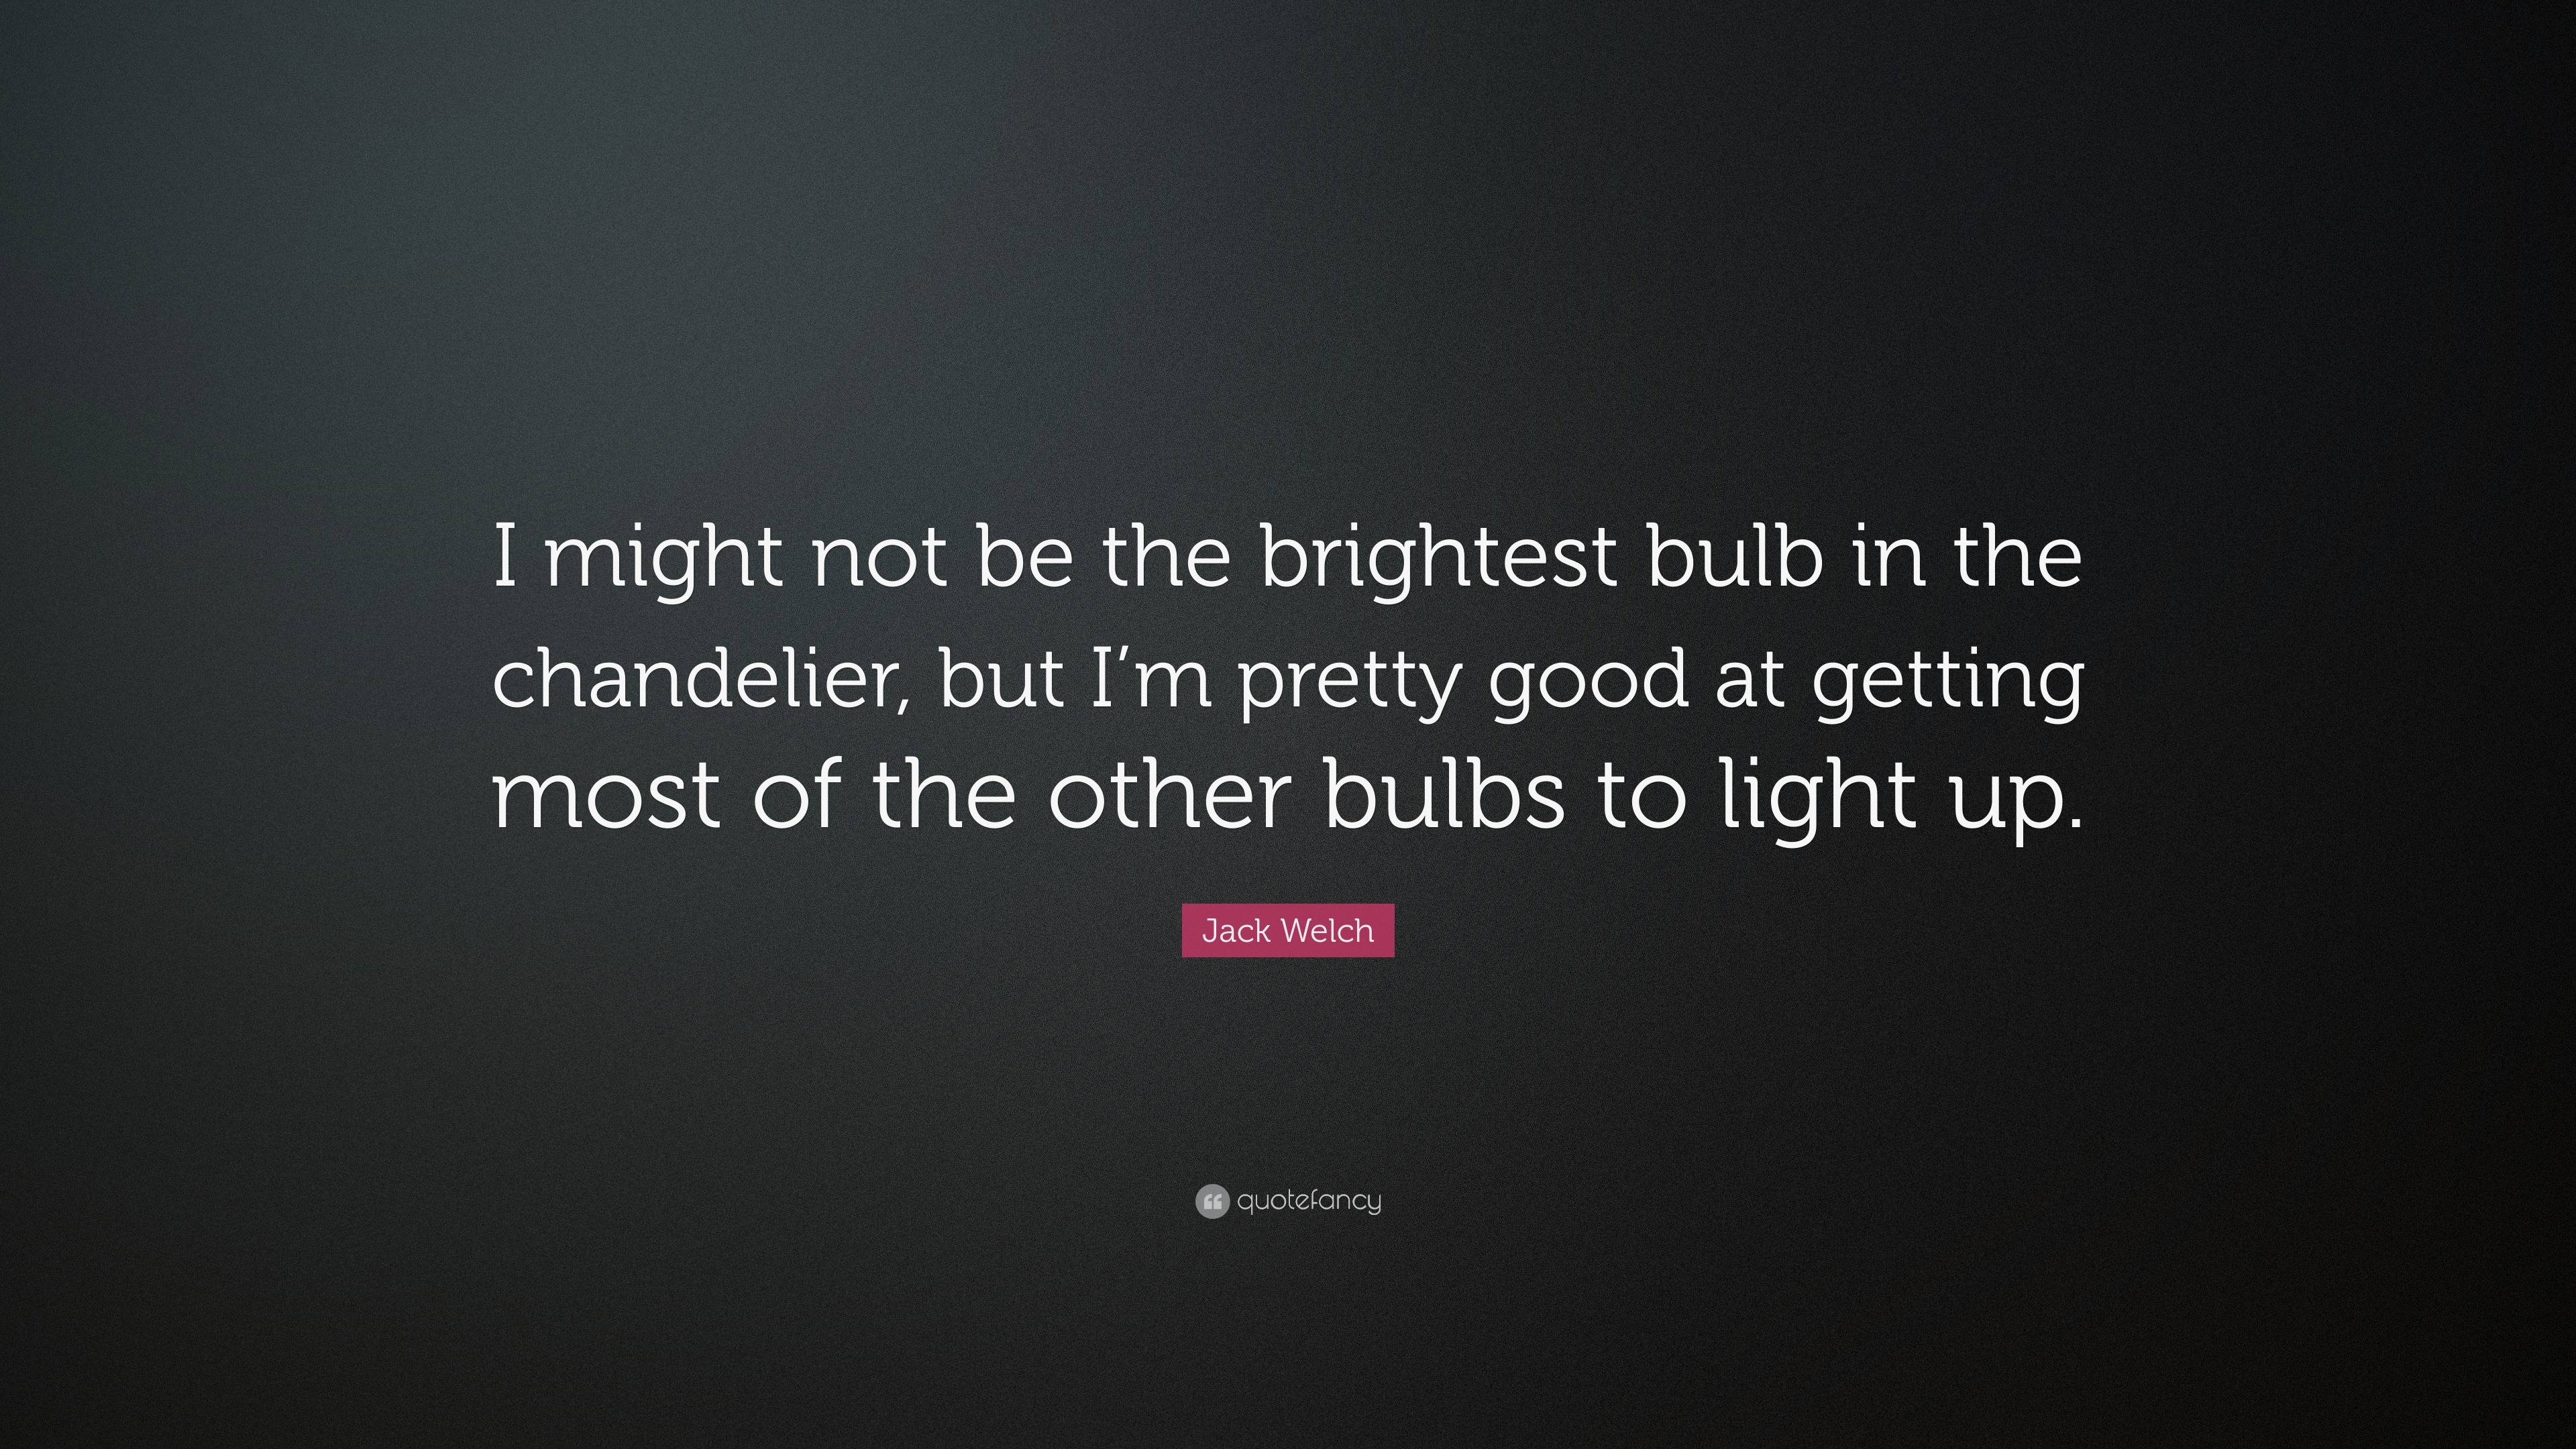 2924261-Jack-Welch-Quote-I-might-not-be-the-brightest-bulb-in-the.jpg